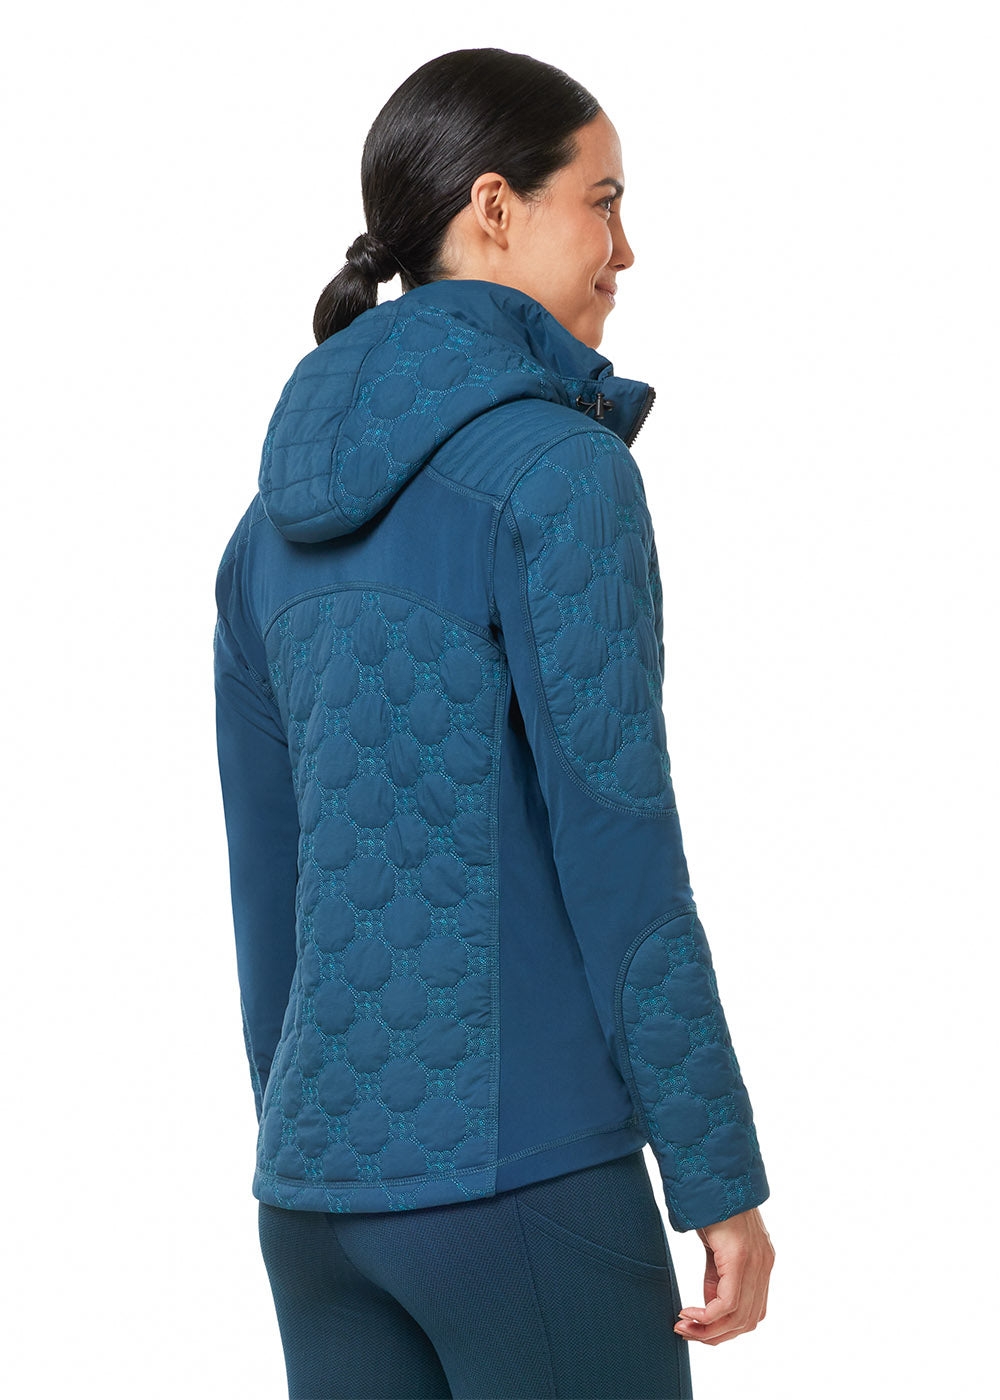 Bit by Bit Quilted Riding Jacket – Kerrits Equestrian Apparel